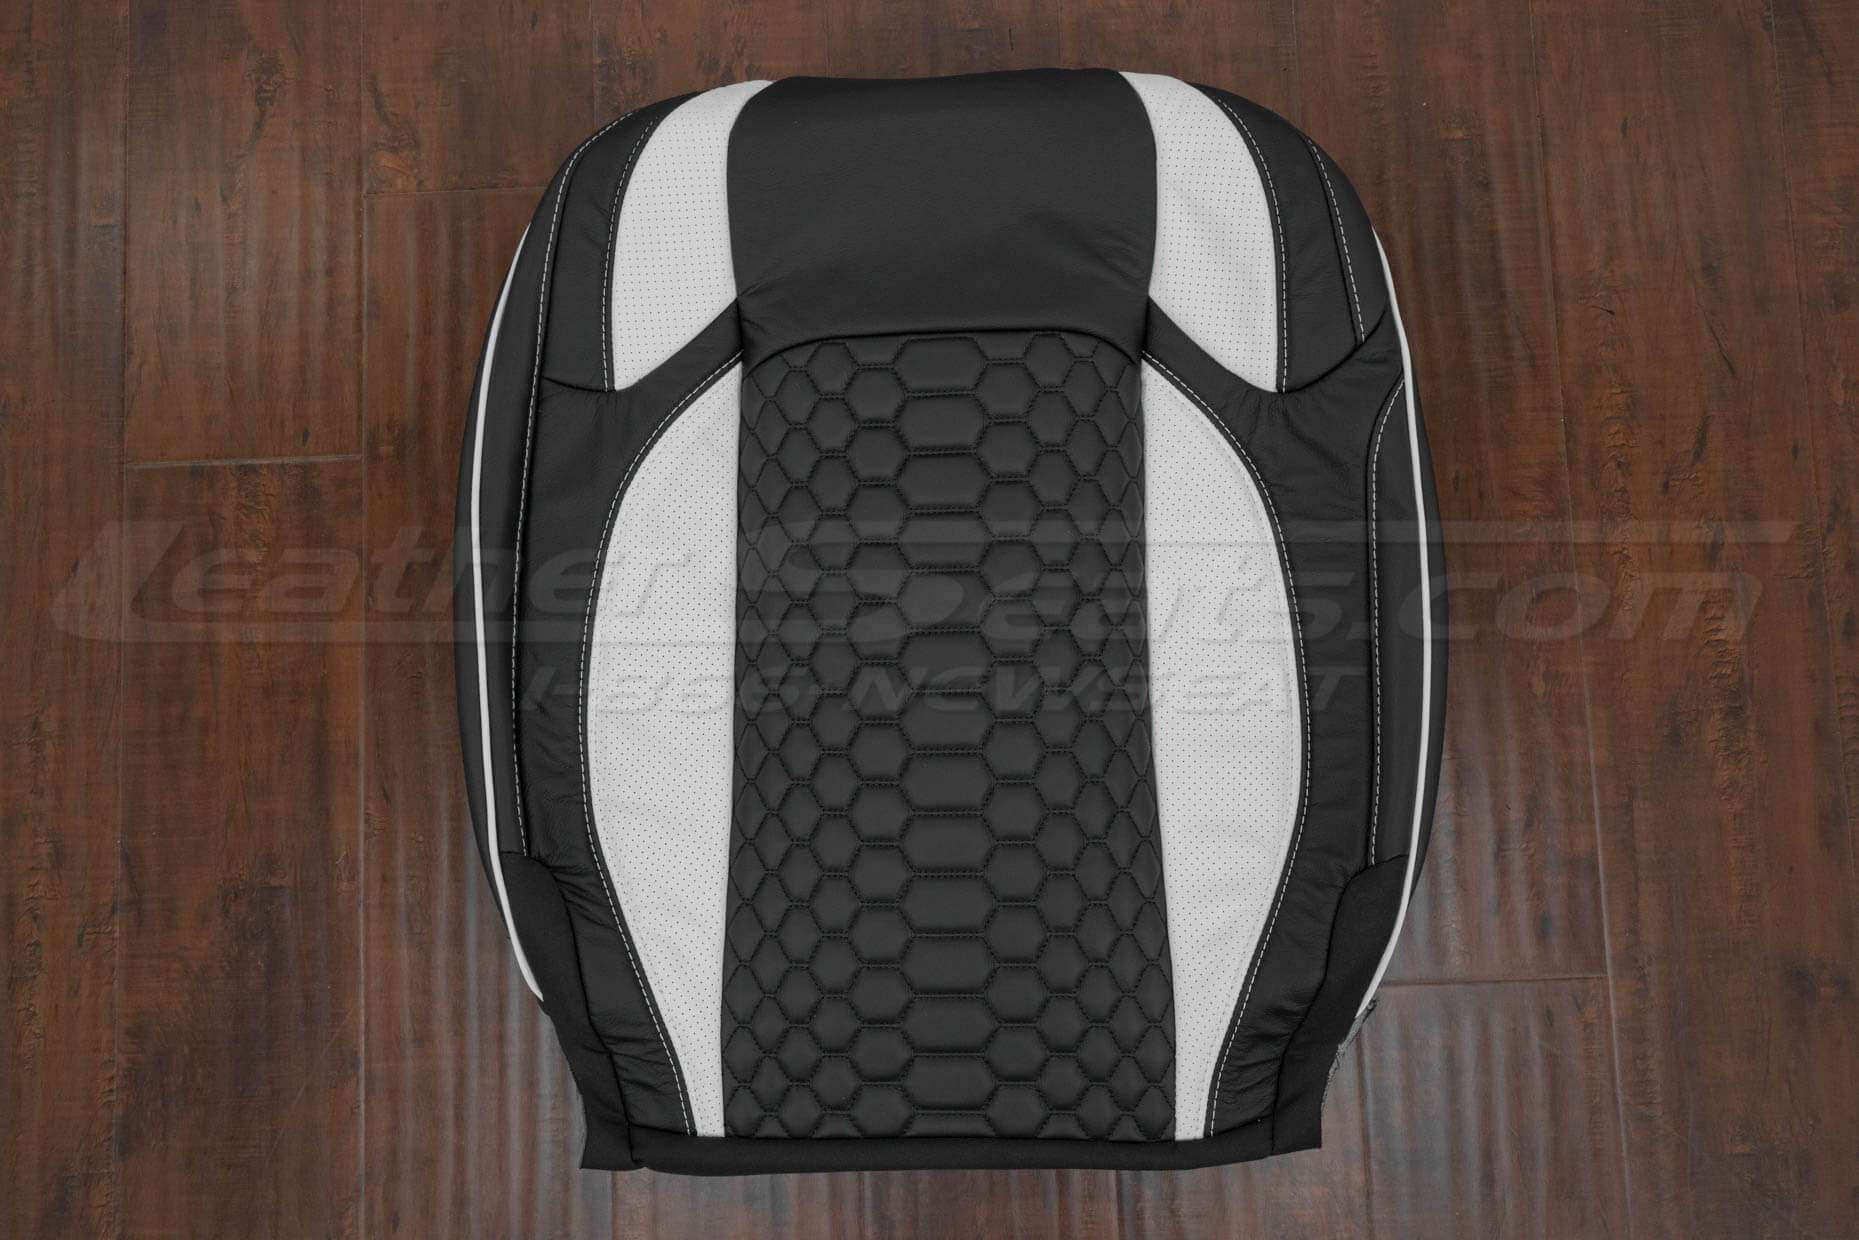 Convex Reiculated Hex front backrest for jeep wrangler